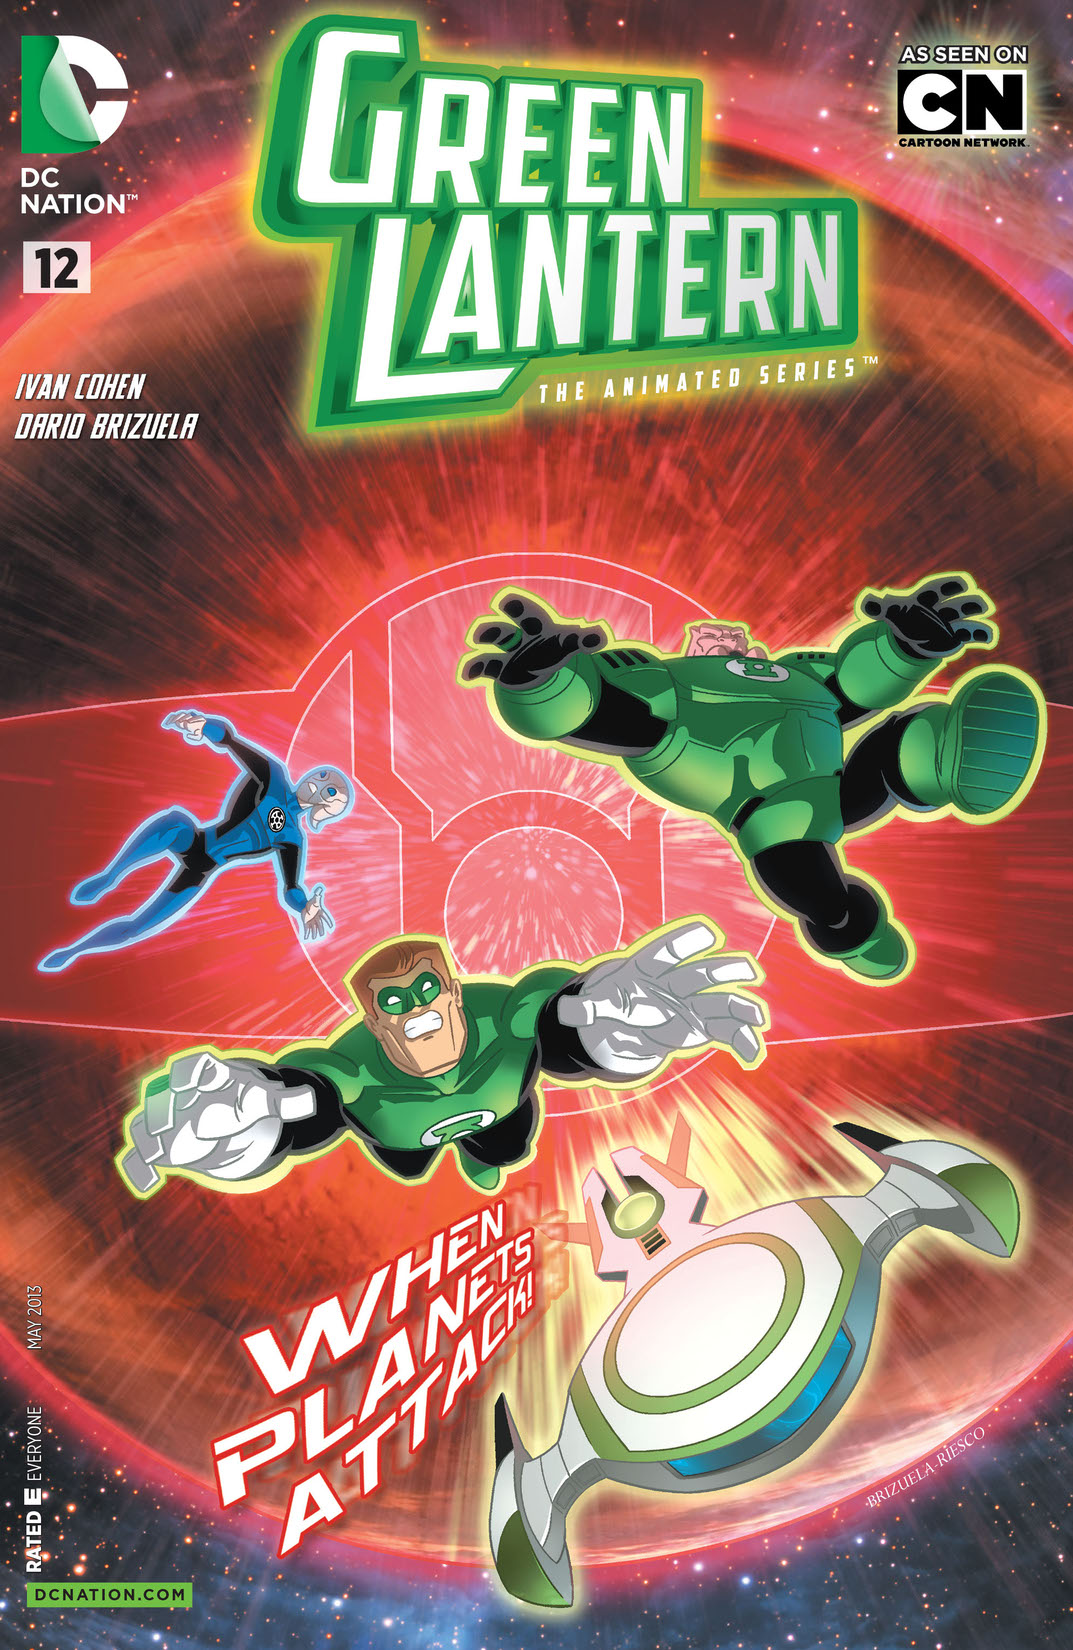 Green Lantern: The Animated Series #12 preview images